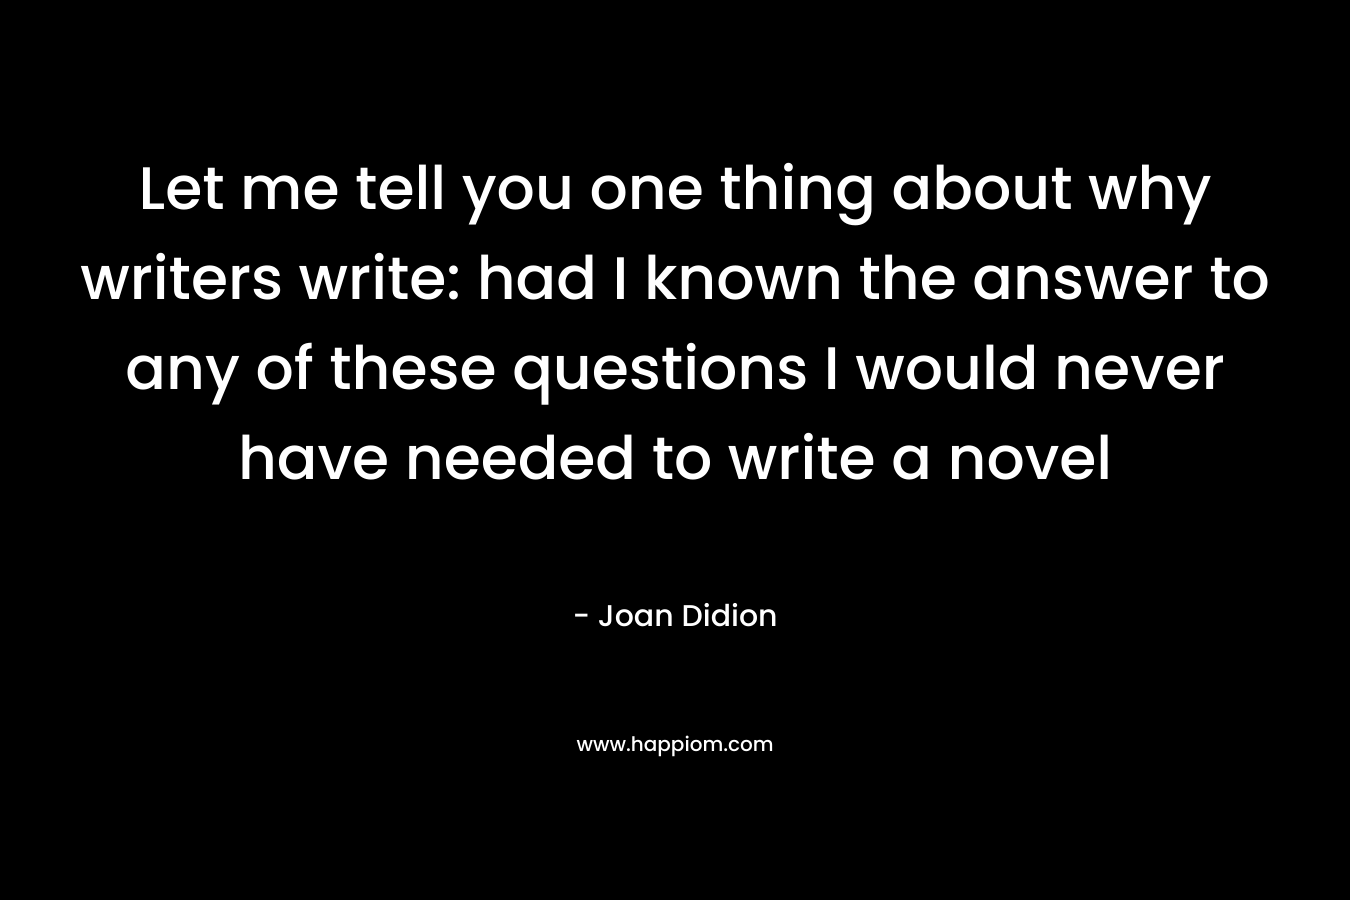 Let me tell you one thing about why writers write: had I known the answer to any of these questions I would never have needed to write a novel